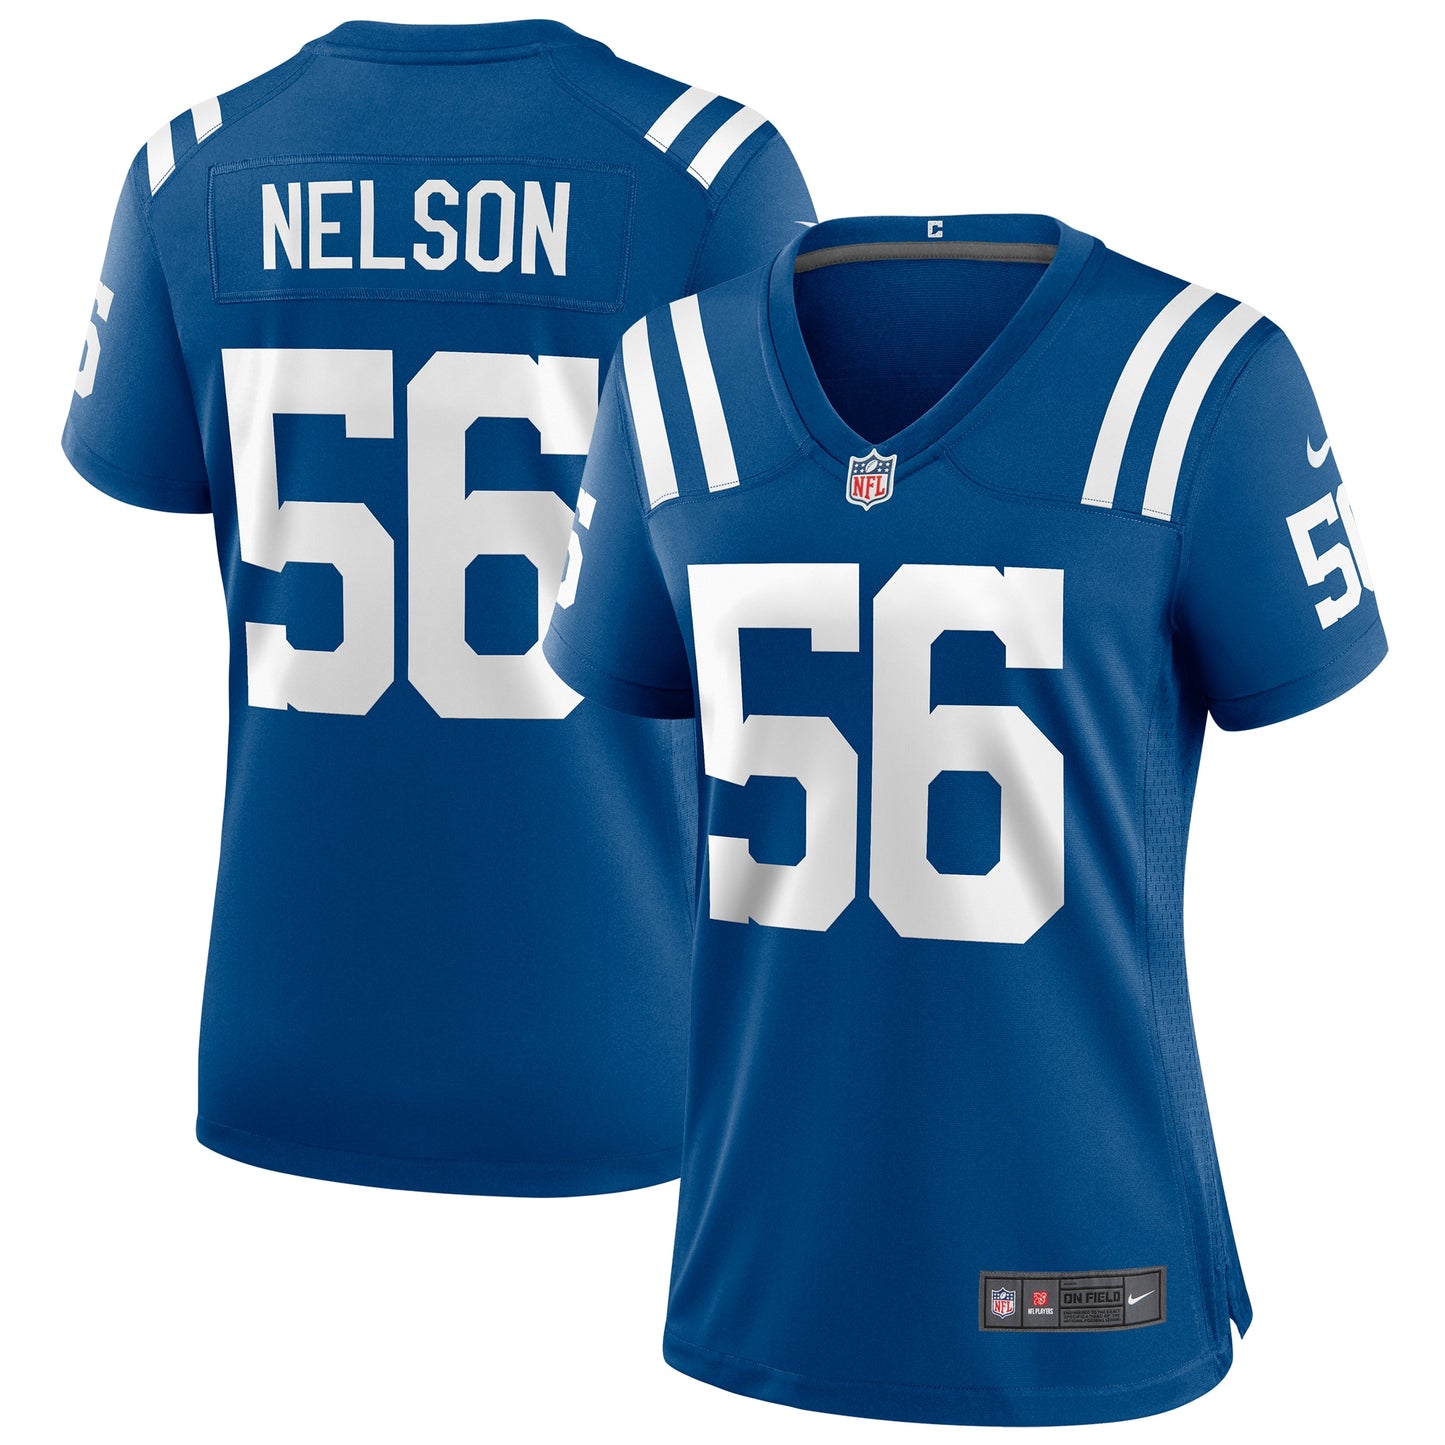 Quenton Nelson Indianapolis Colts Nike Women's Player Game Jersey - Royal